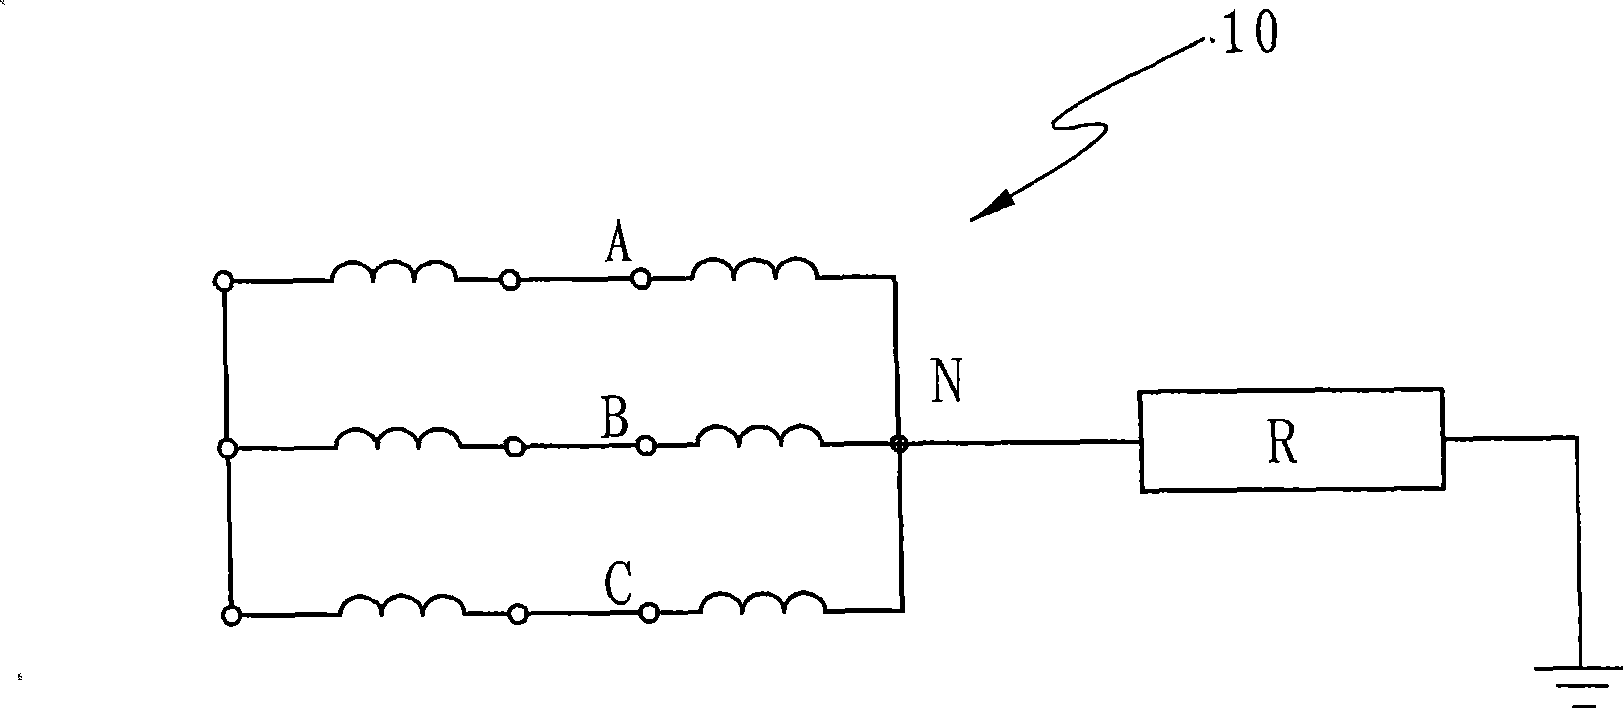 Grounding method of primary coil N end of relatively semi-insulating electromagnetic voltage transformer and iron core